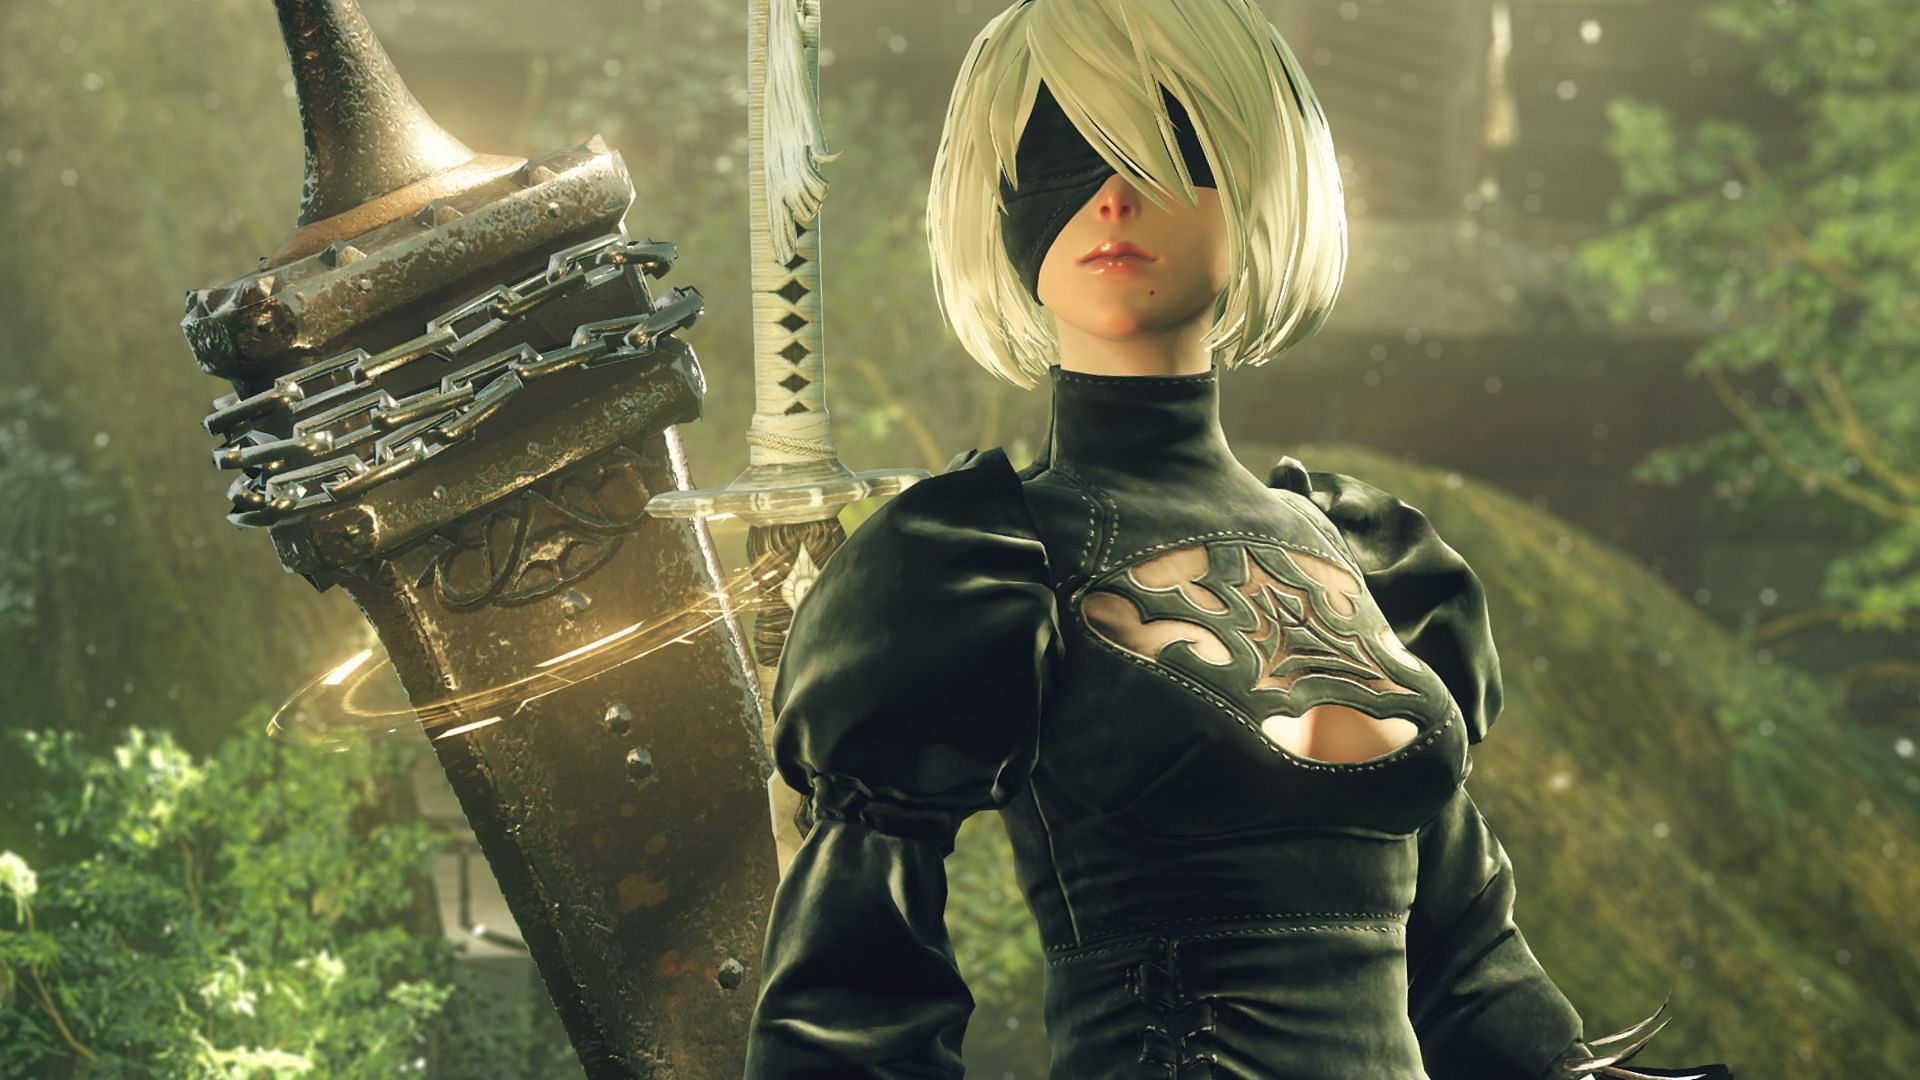 2B as seen in the NieR: Automata video game (Image via Square Enix)